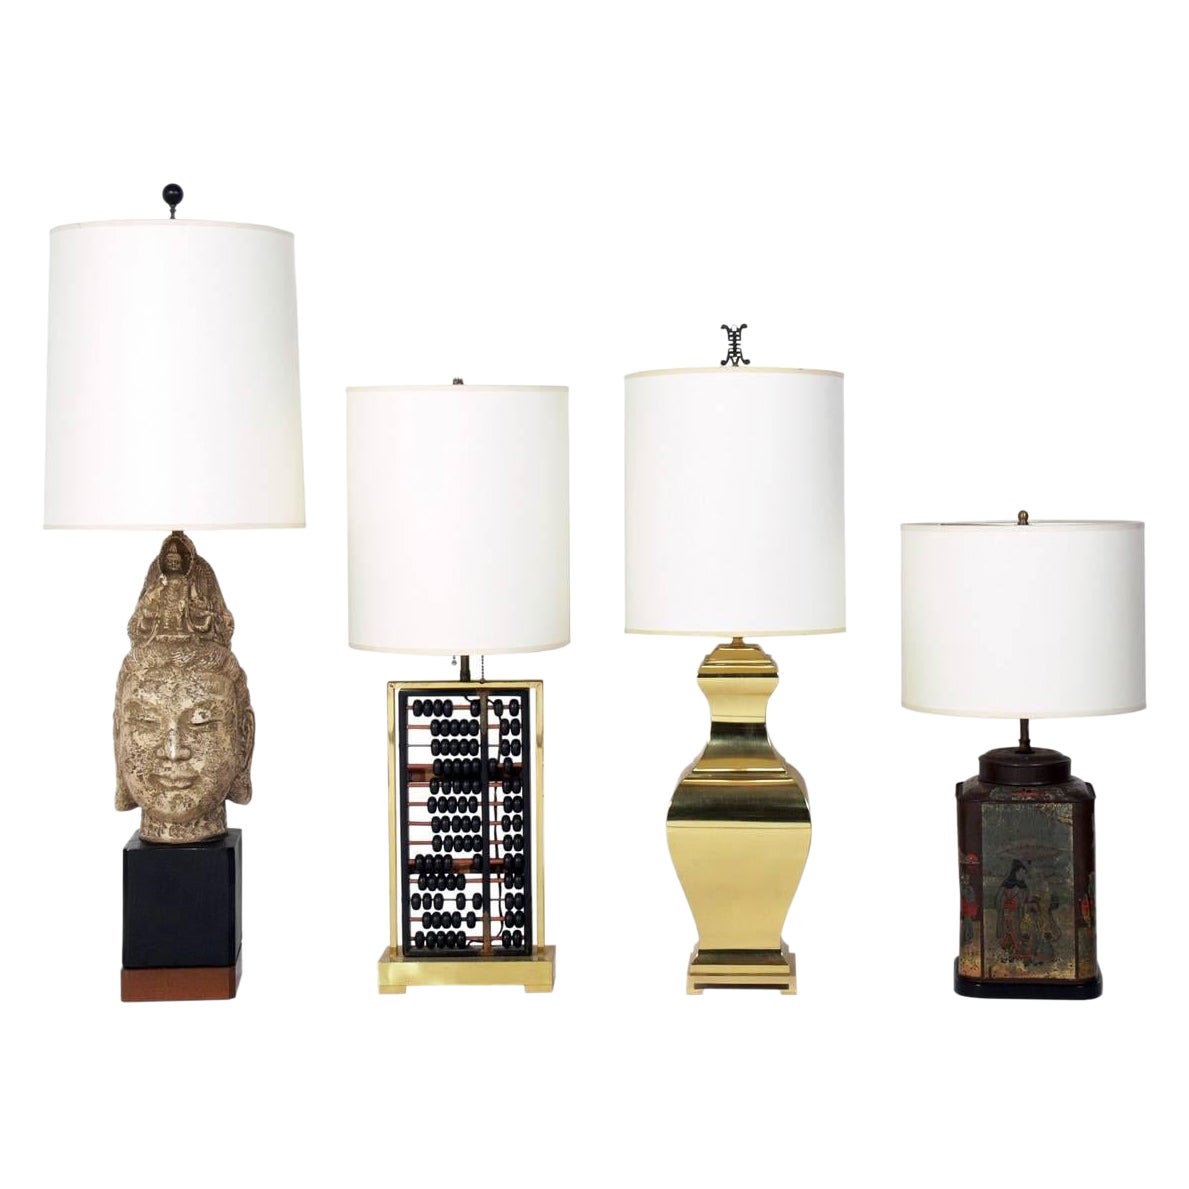 Selection of Asian Influenced Lamps 